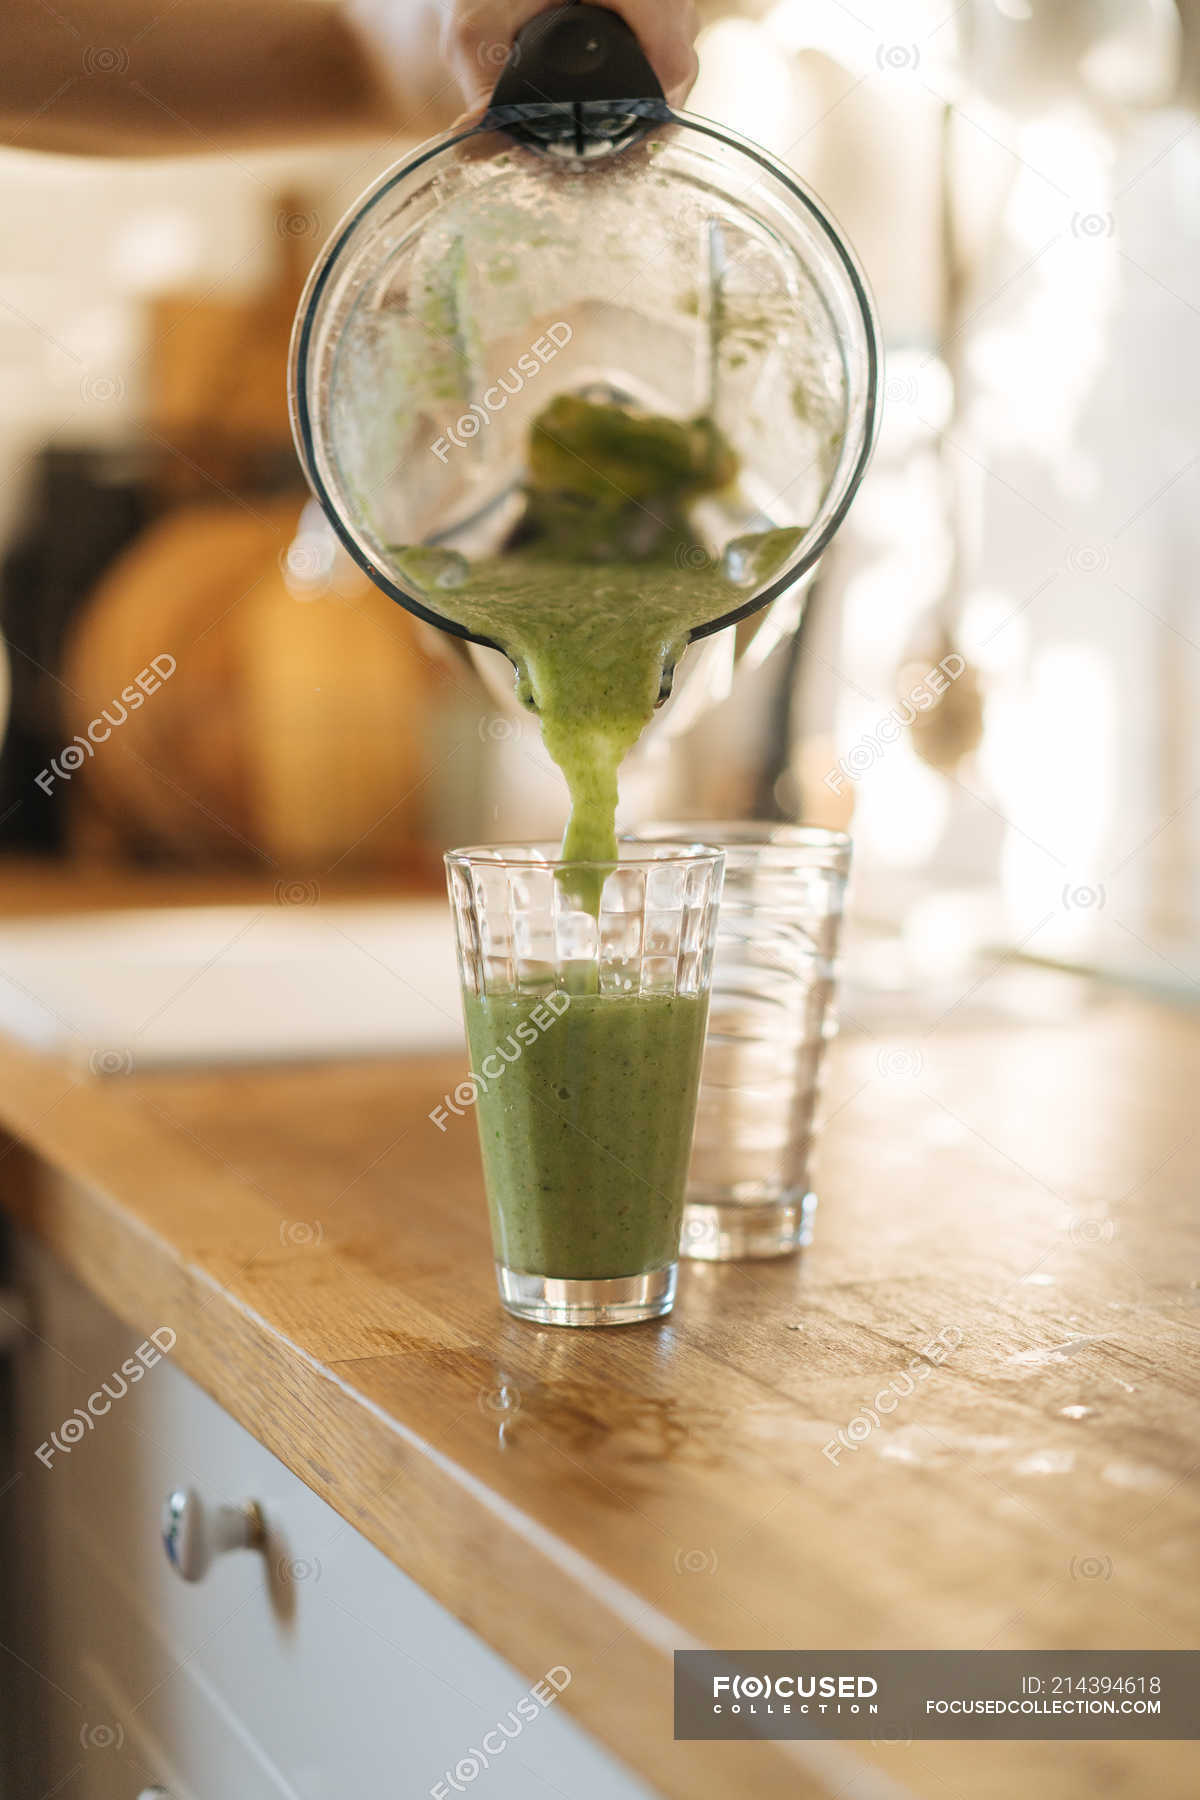 Human hand pouring smoothie in glass — natural, recipe - Stock Photo |  #214394618